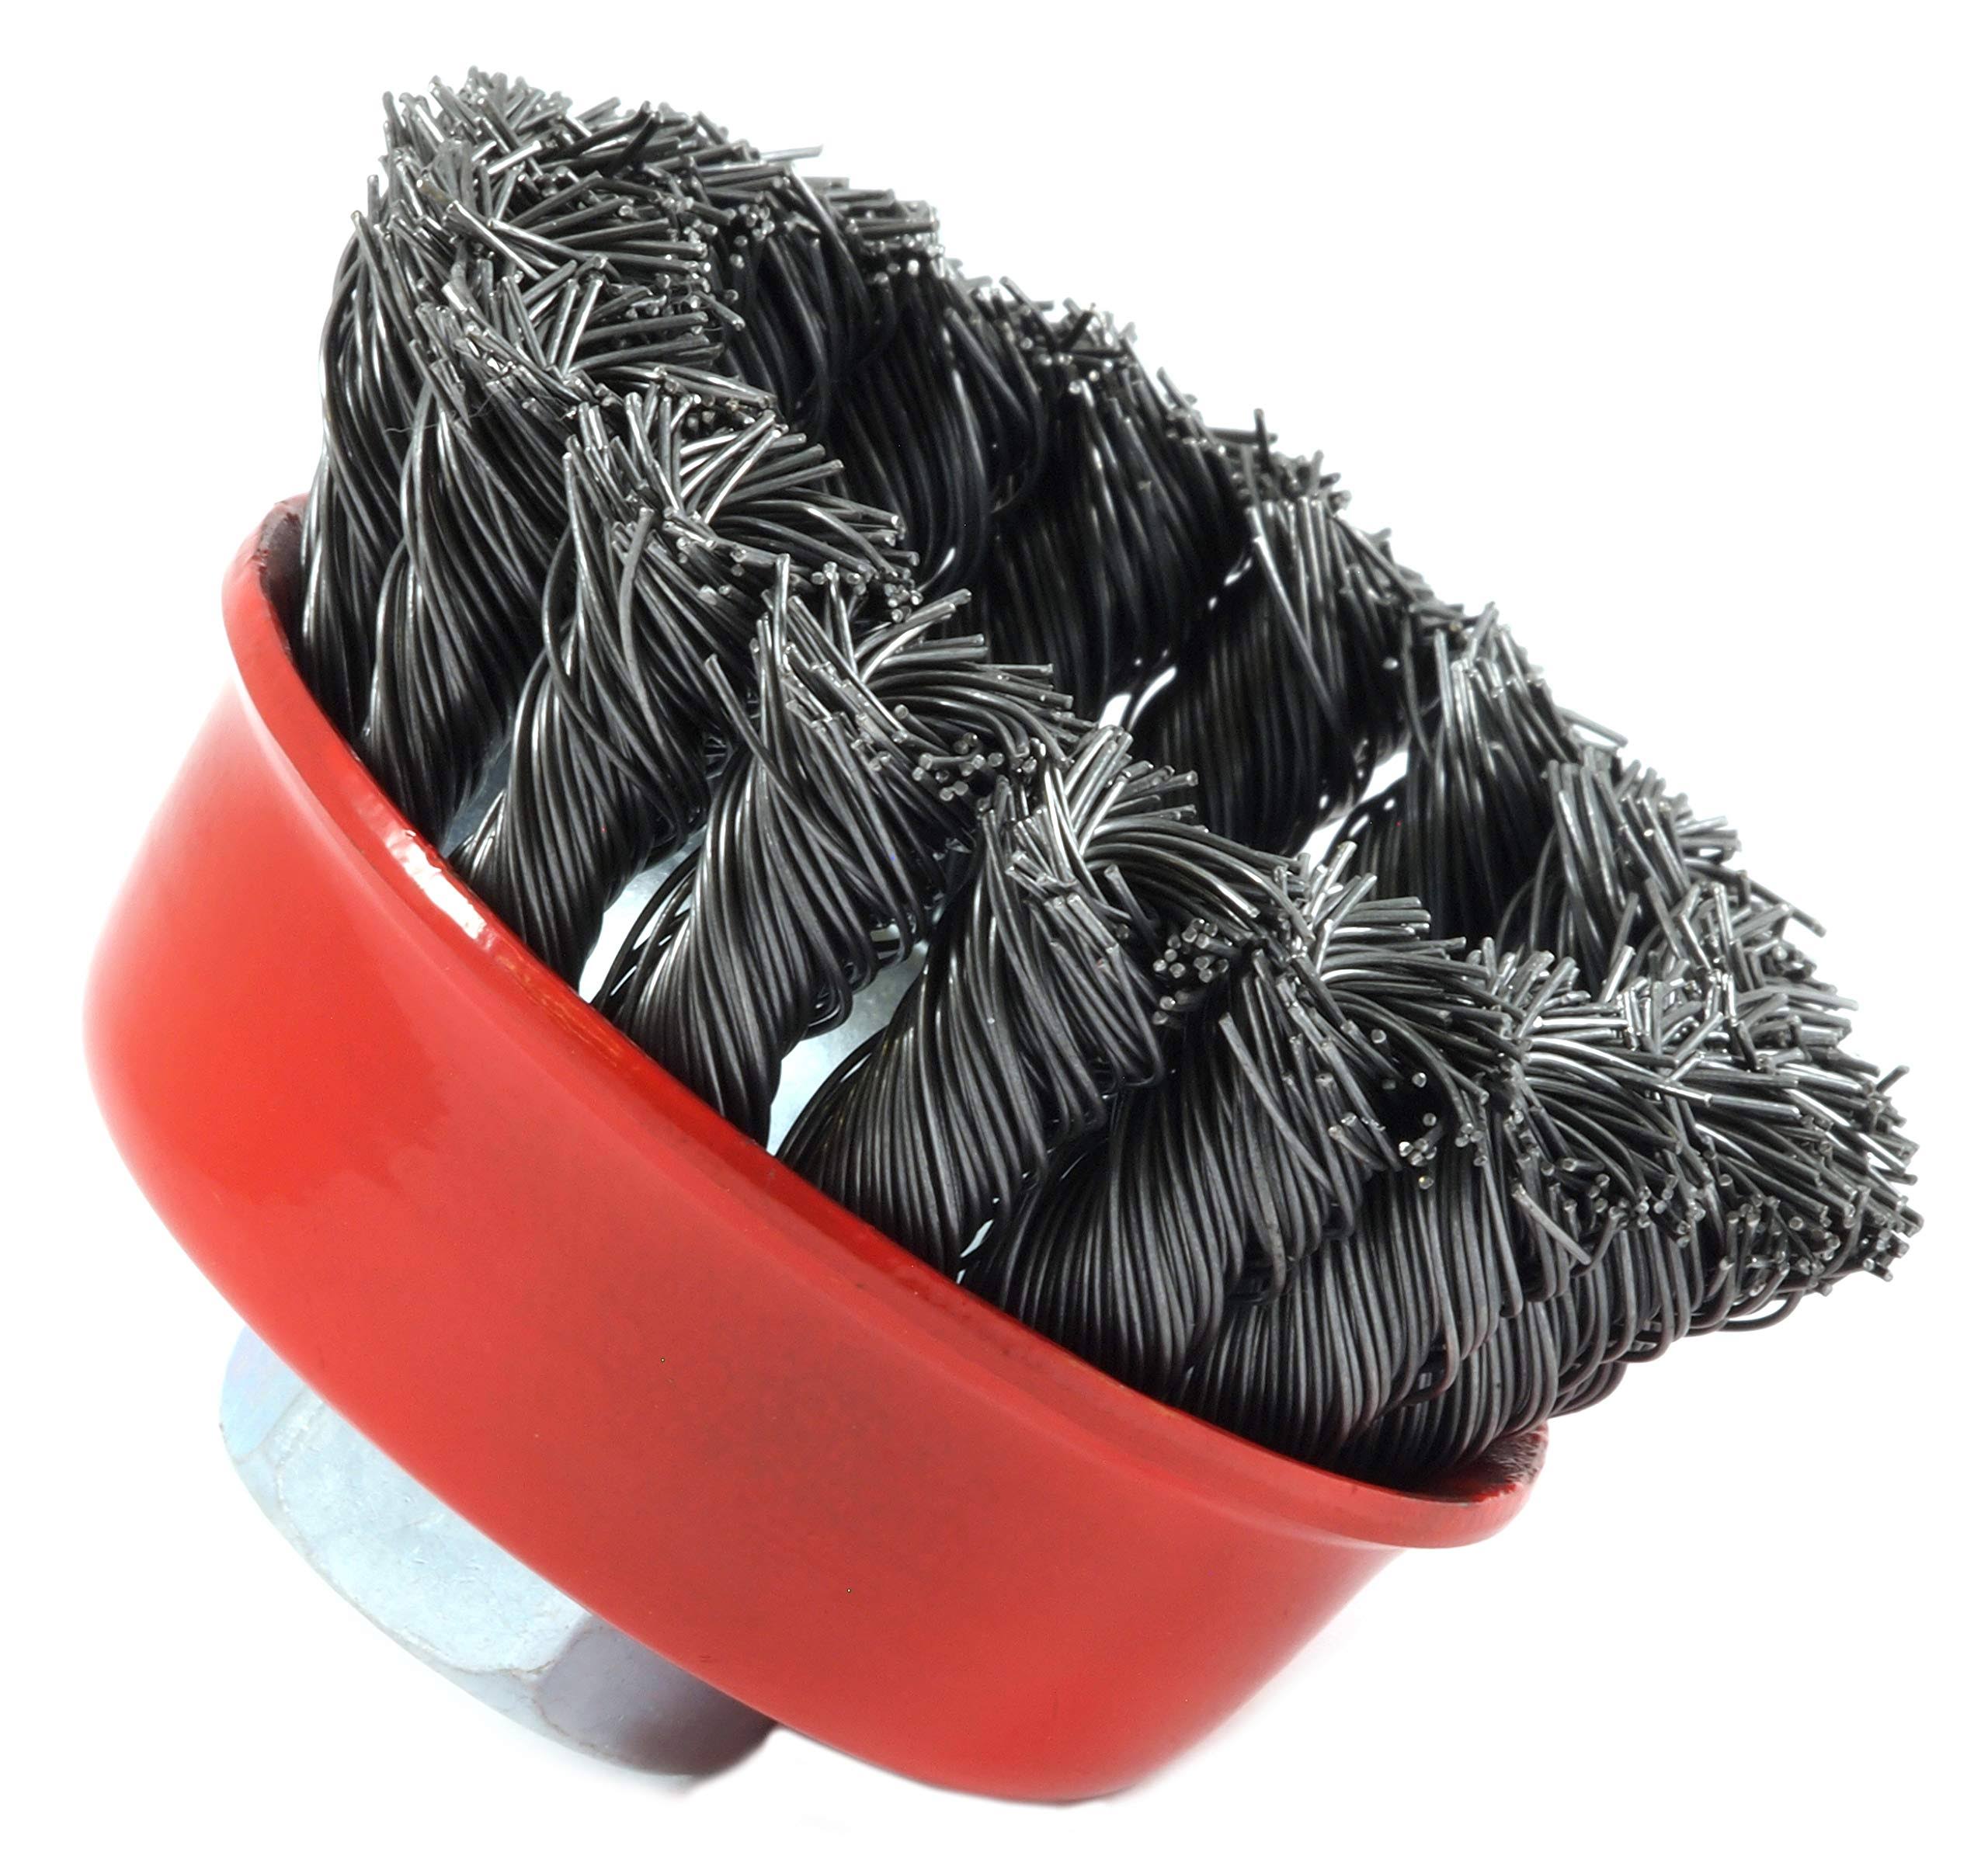 Forney 72757 Wire Cup Brush - Knotted, with 5/8"-11 Threaded Arbor